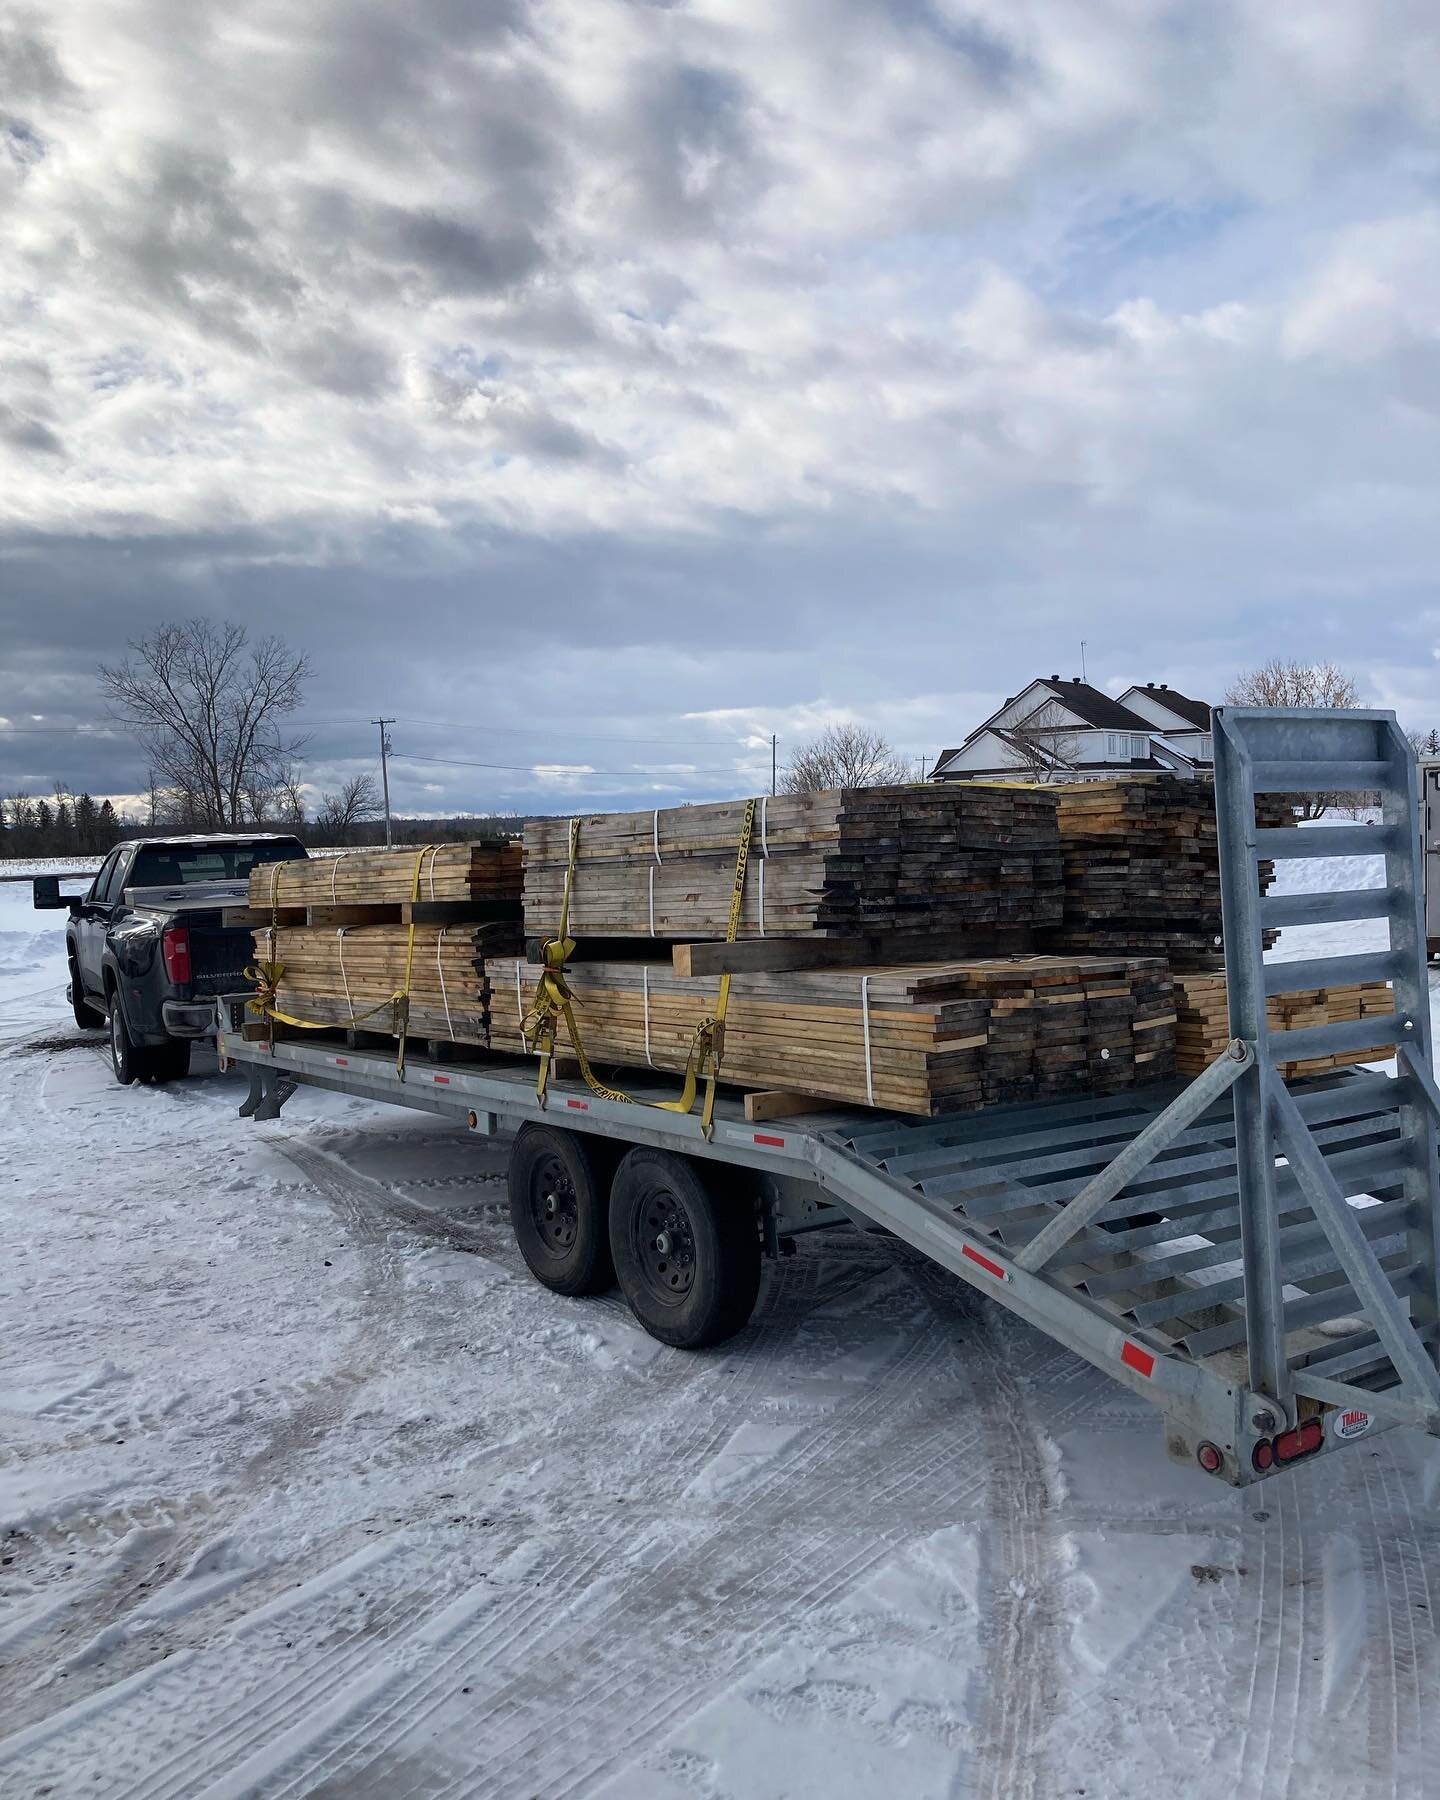 Big order of White Pine siding off to be planed!
This has been our biggest project to-date with over 2 years of coordinating and communicating with architects, developers and surveyors. All logs were sourced from the development site of a local fores